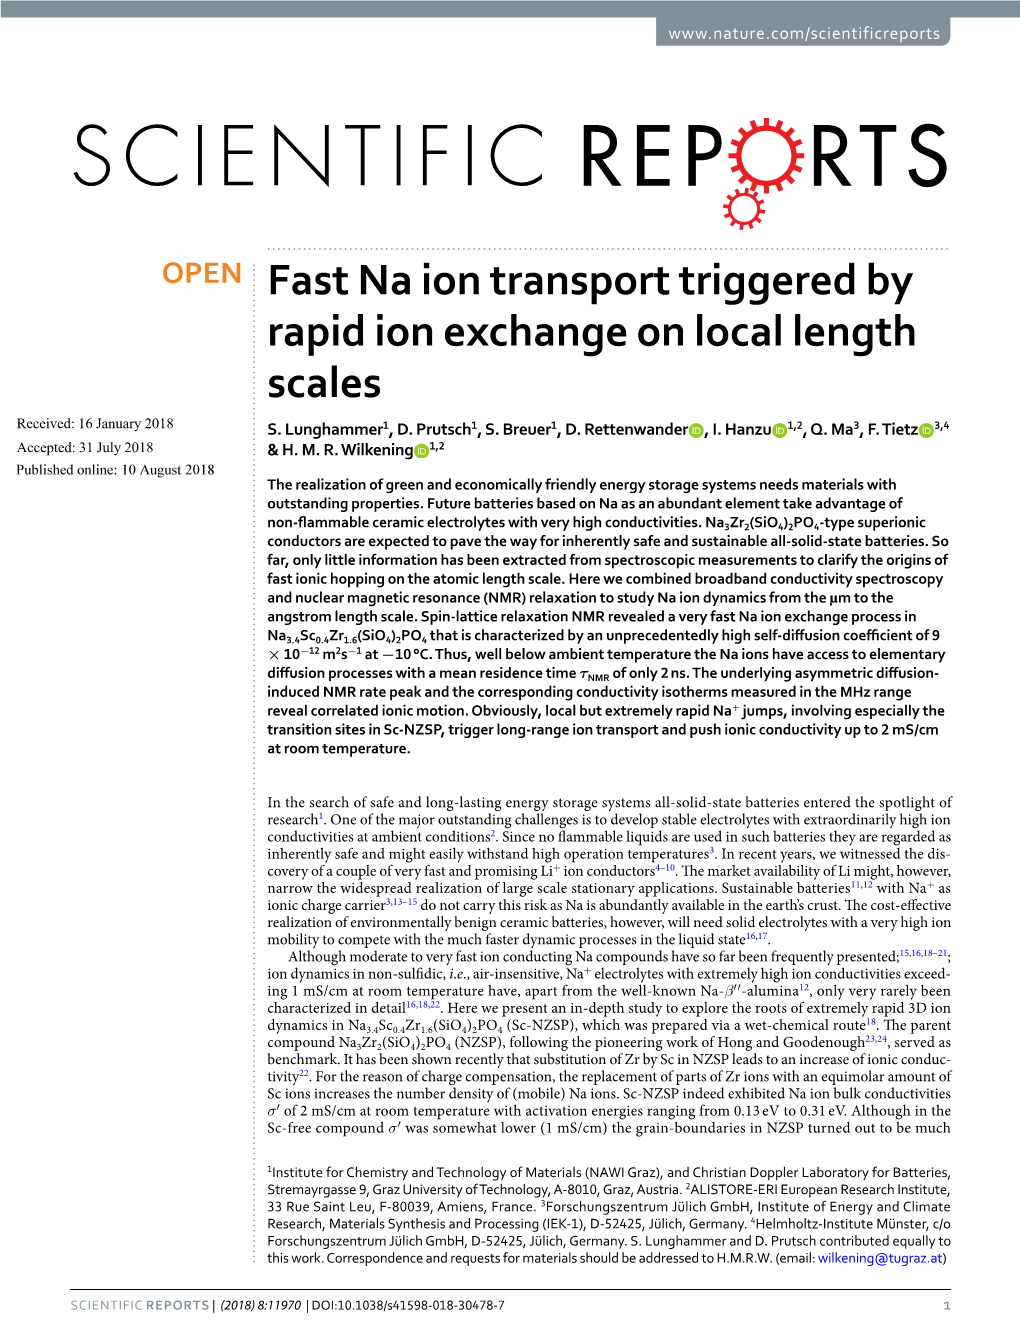 Fast Na Ion Transport Triggered by Rapid Ion Exchange on Local Length Scales Received: 16 January 2018 S